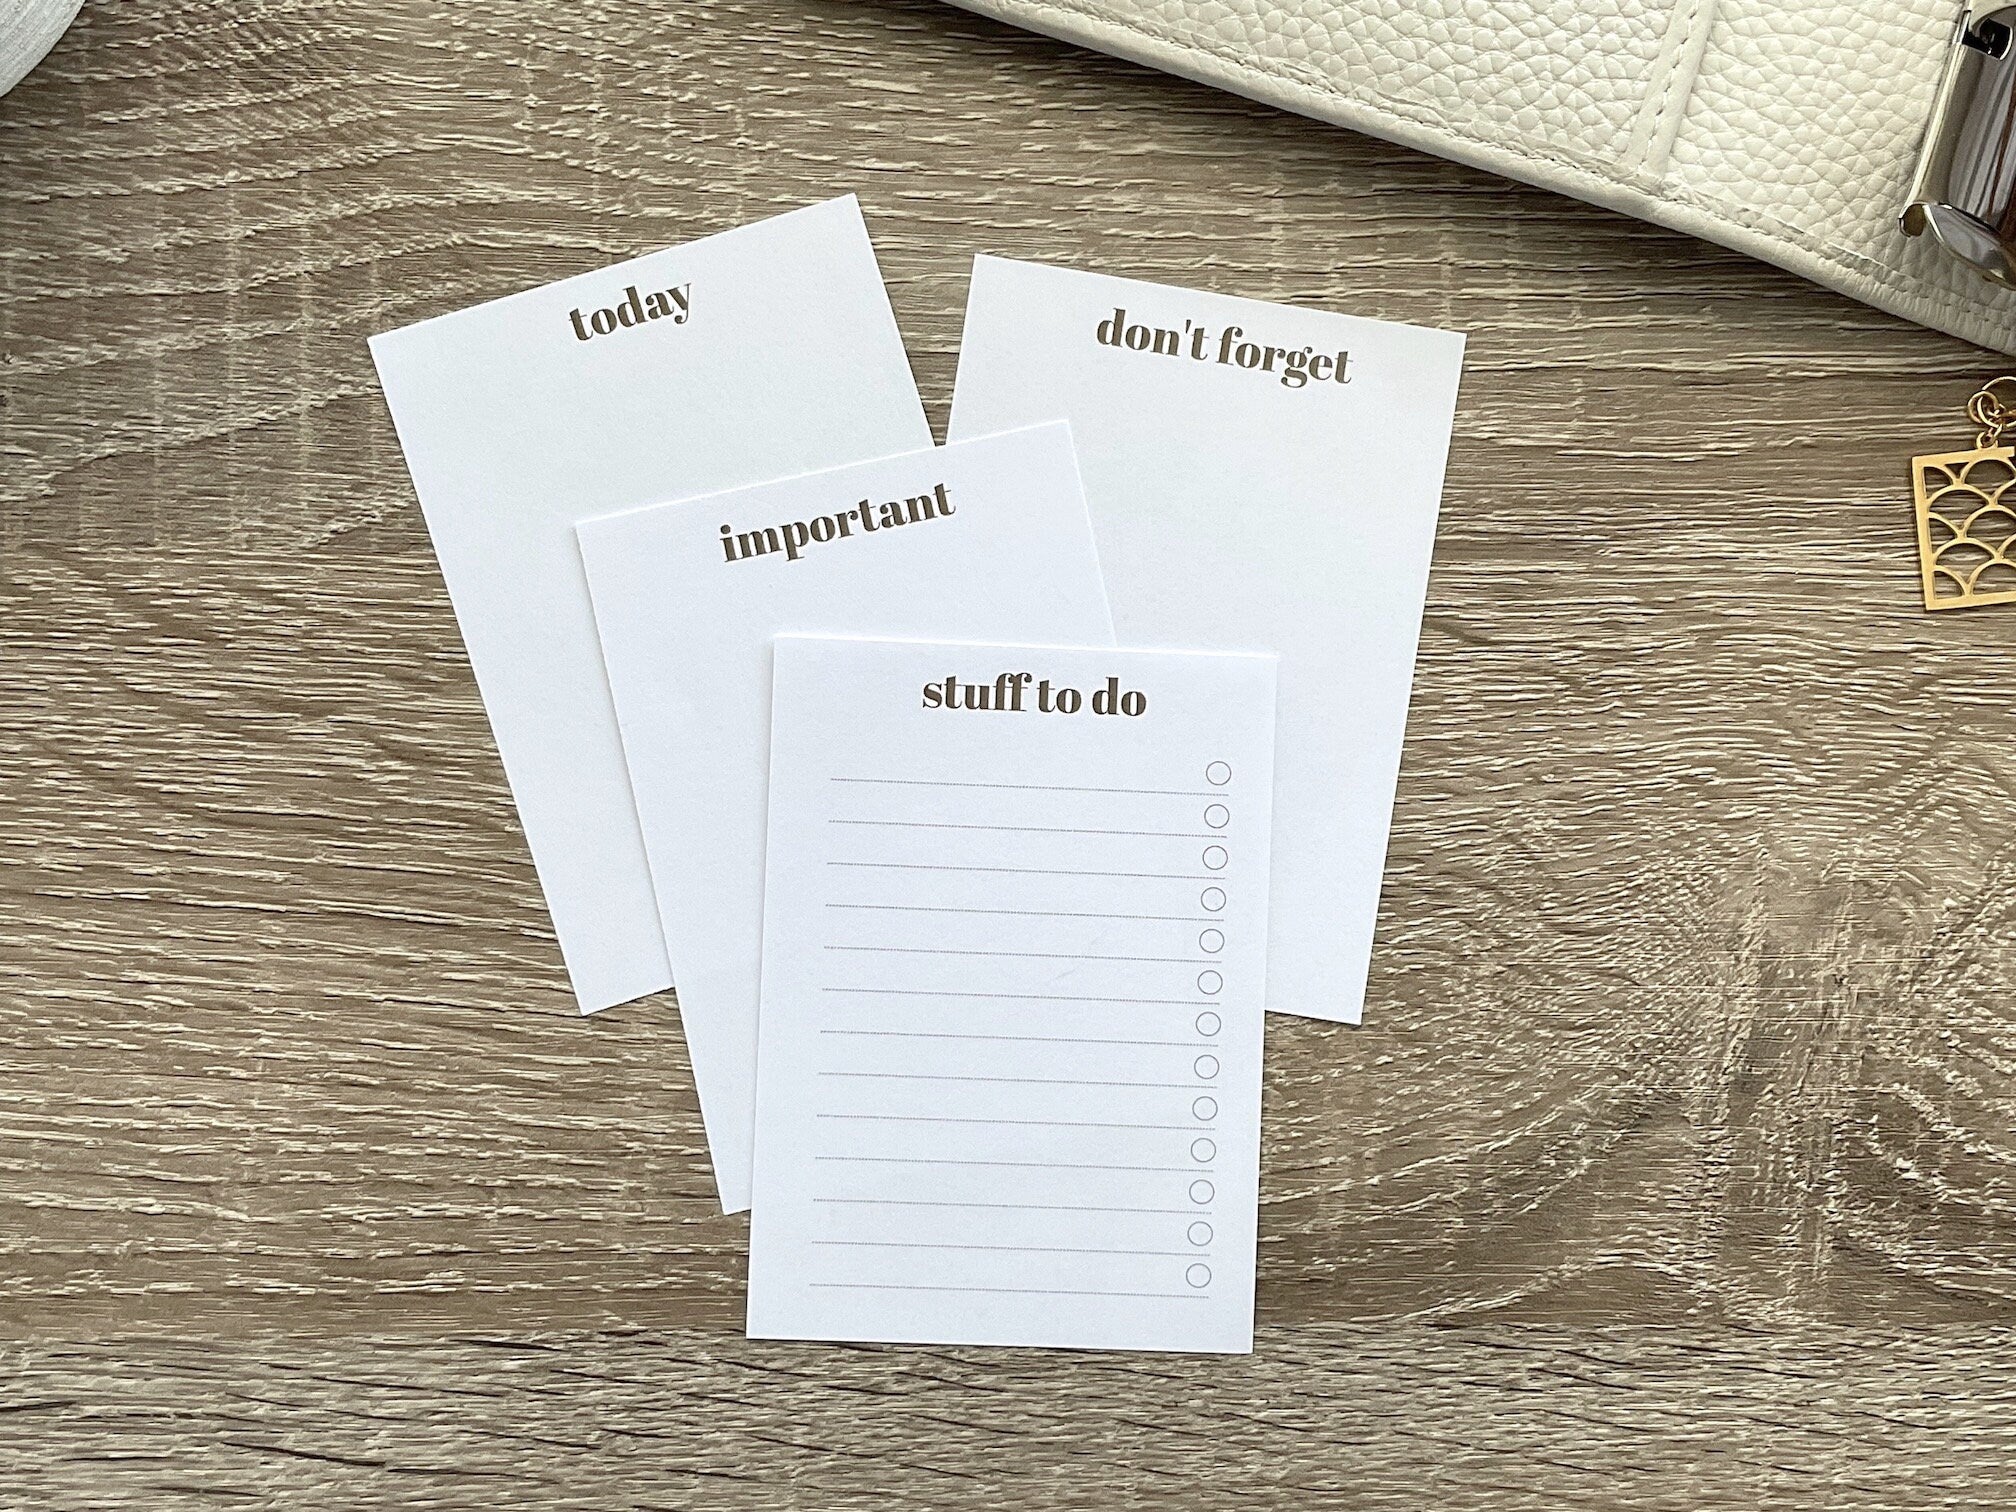 Pocket Sheets - To Do, Today, Reminders, Important